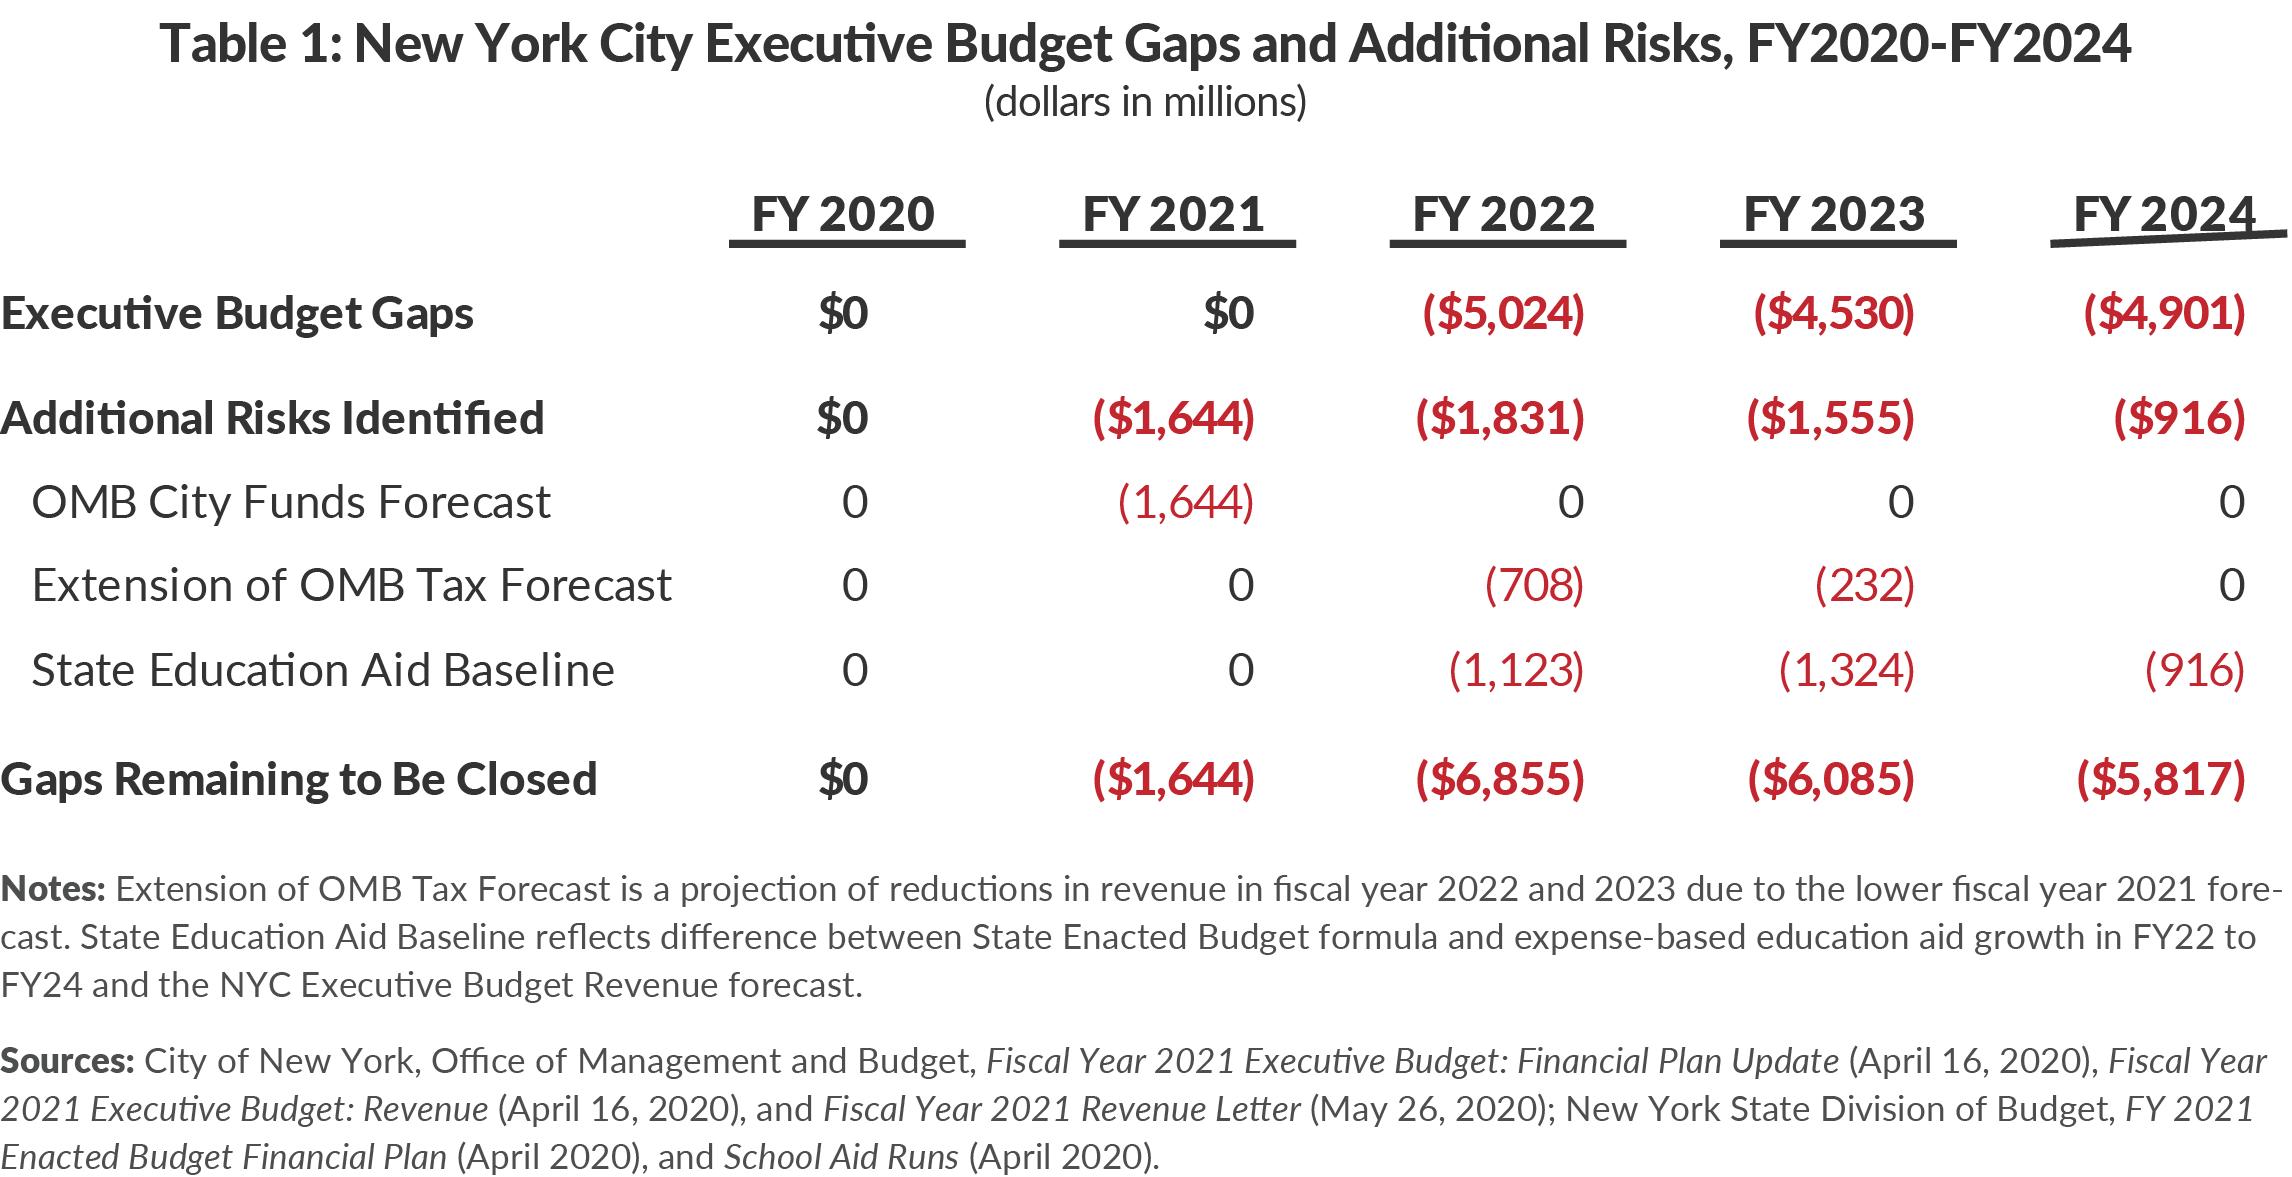 Table 1: New York City Executive Budget Gaps and Additional Risks, FY2020-FY2024